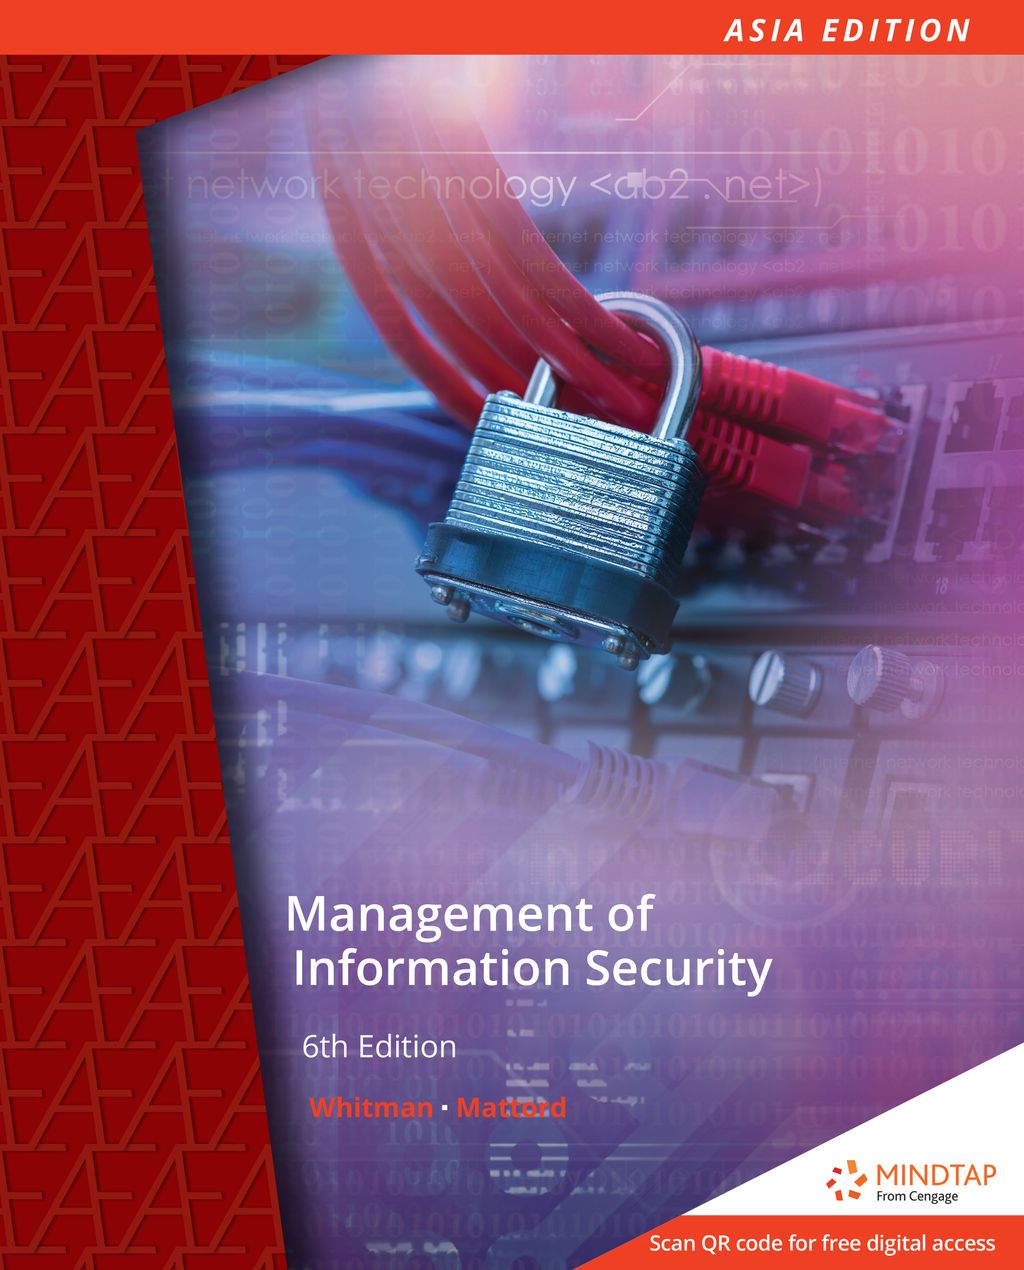 Managment of Information Security Whitman 6E.jfif